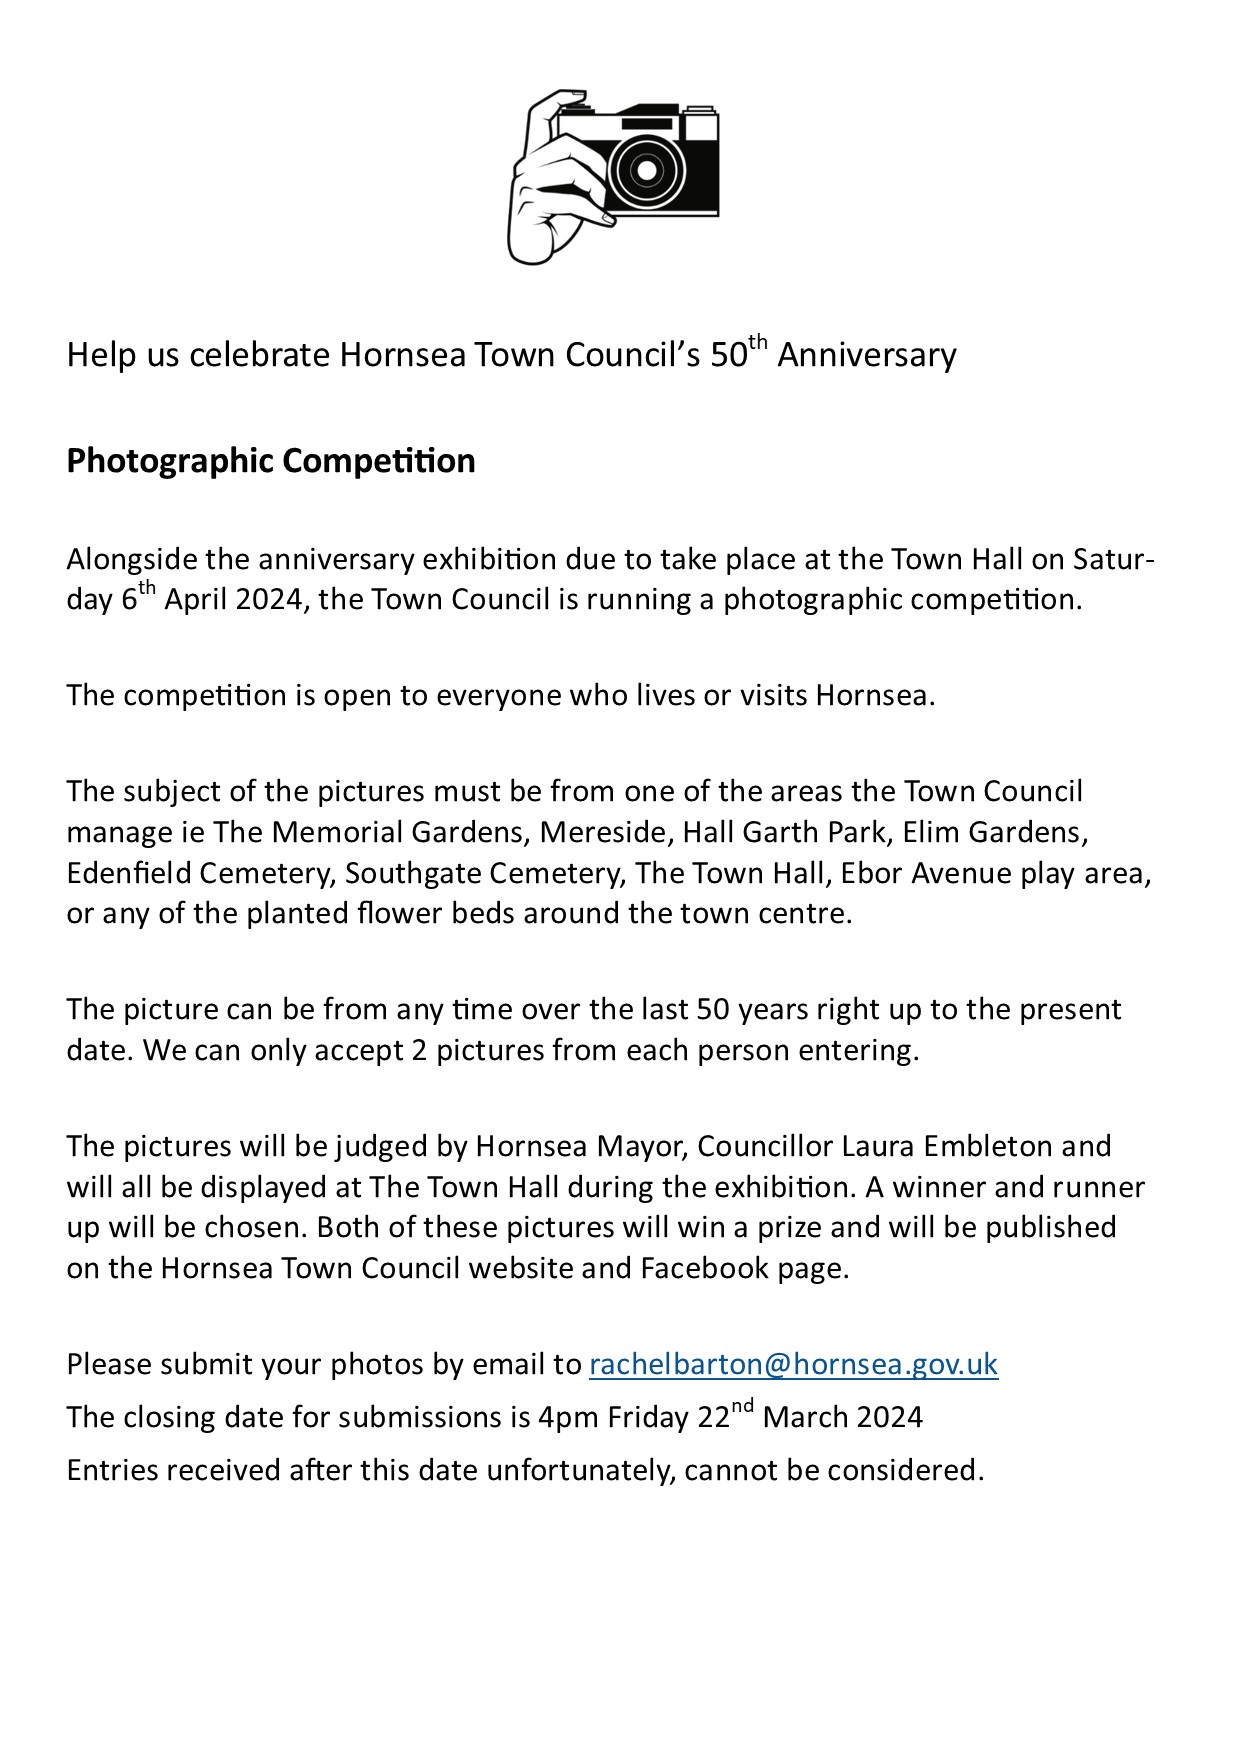 Anniversary Photo Competition